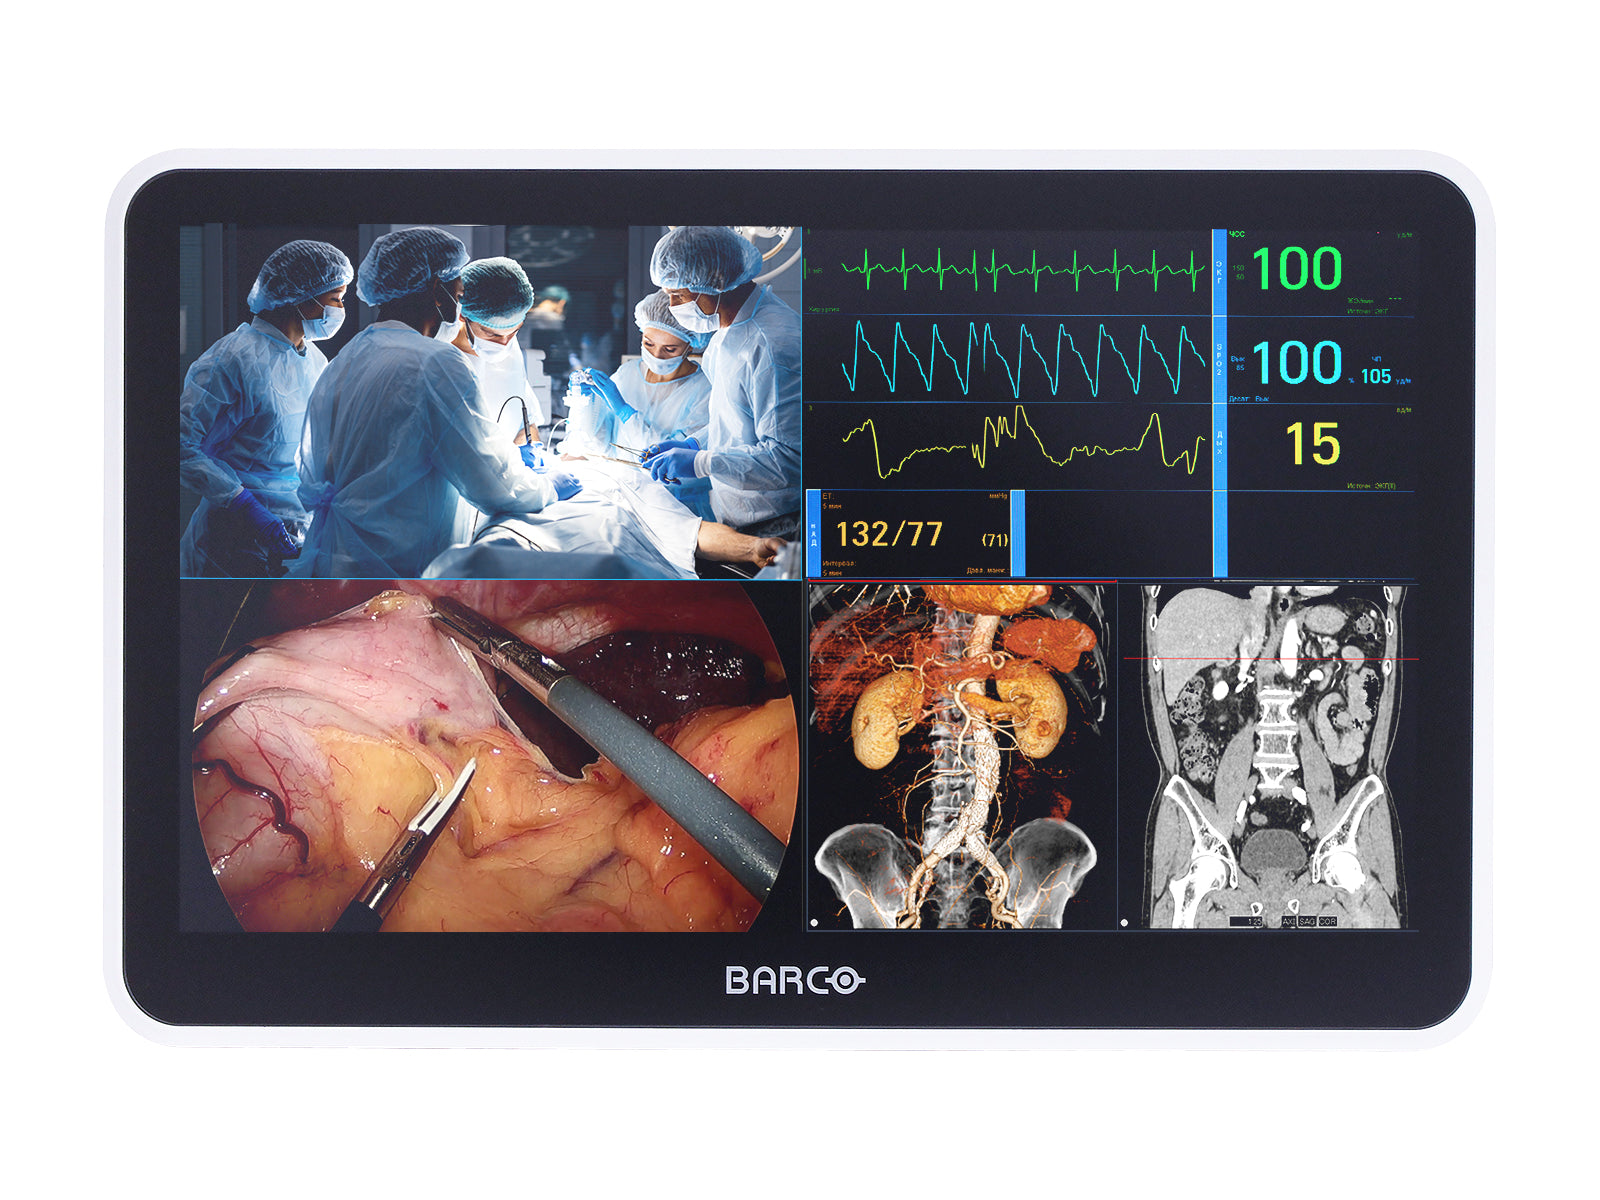 Barco MUIP-2112 12.5" Color Clinical Review Multi-touch Screen Monitor (K9307937)